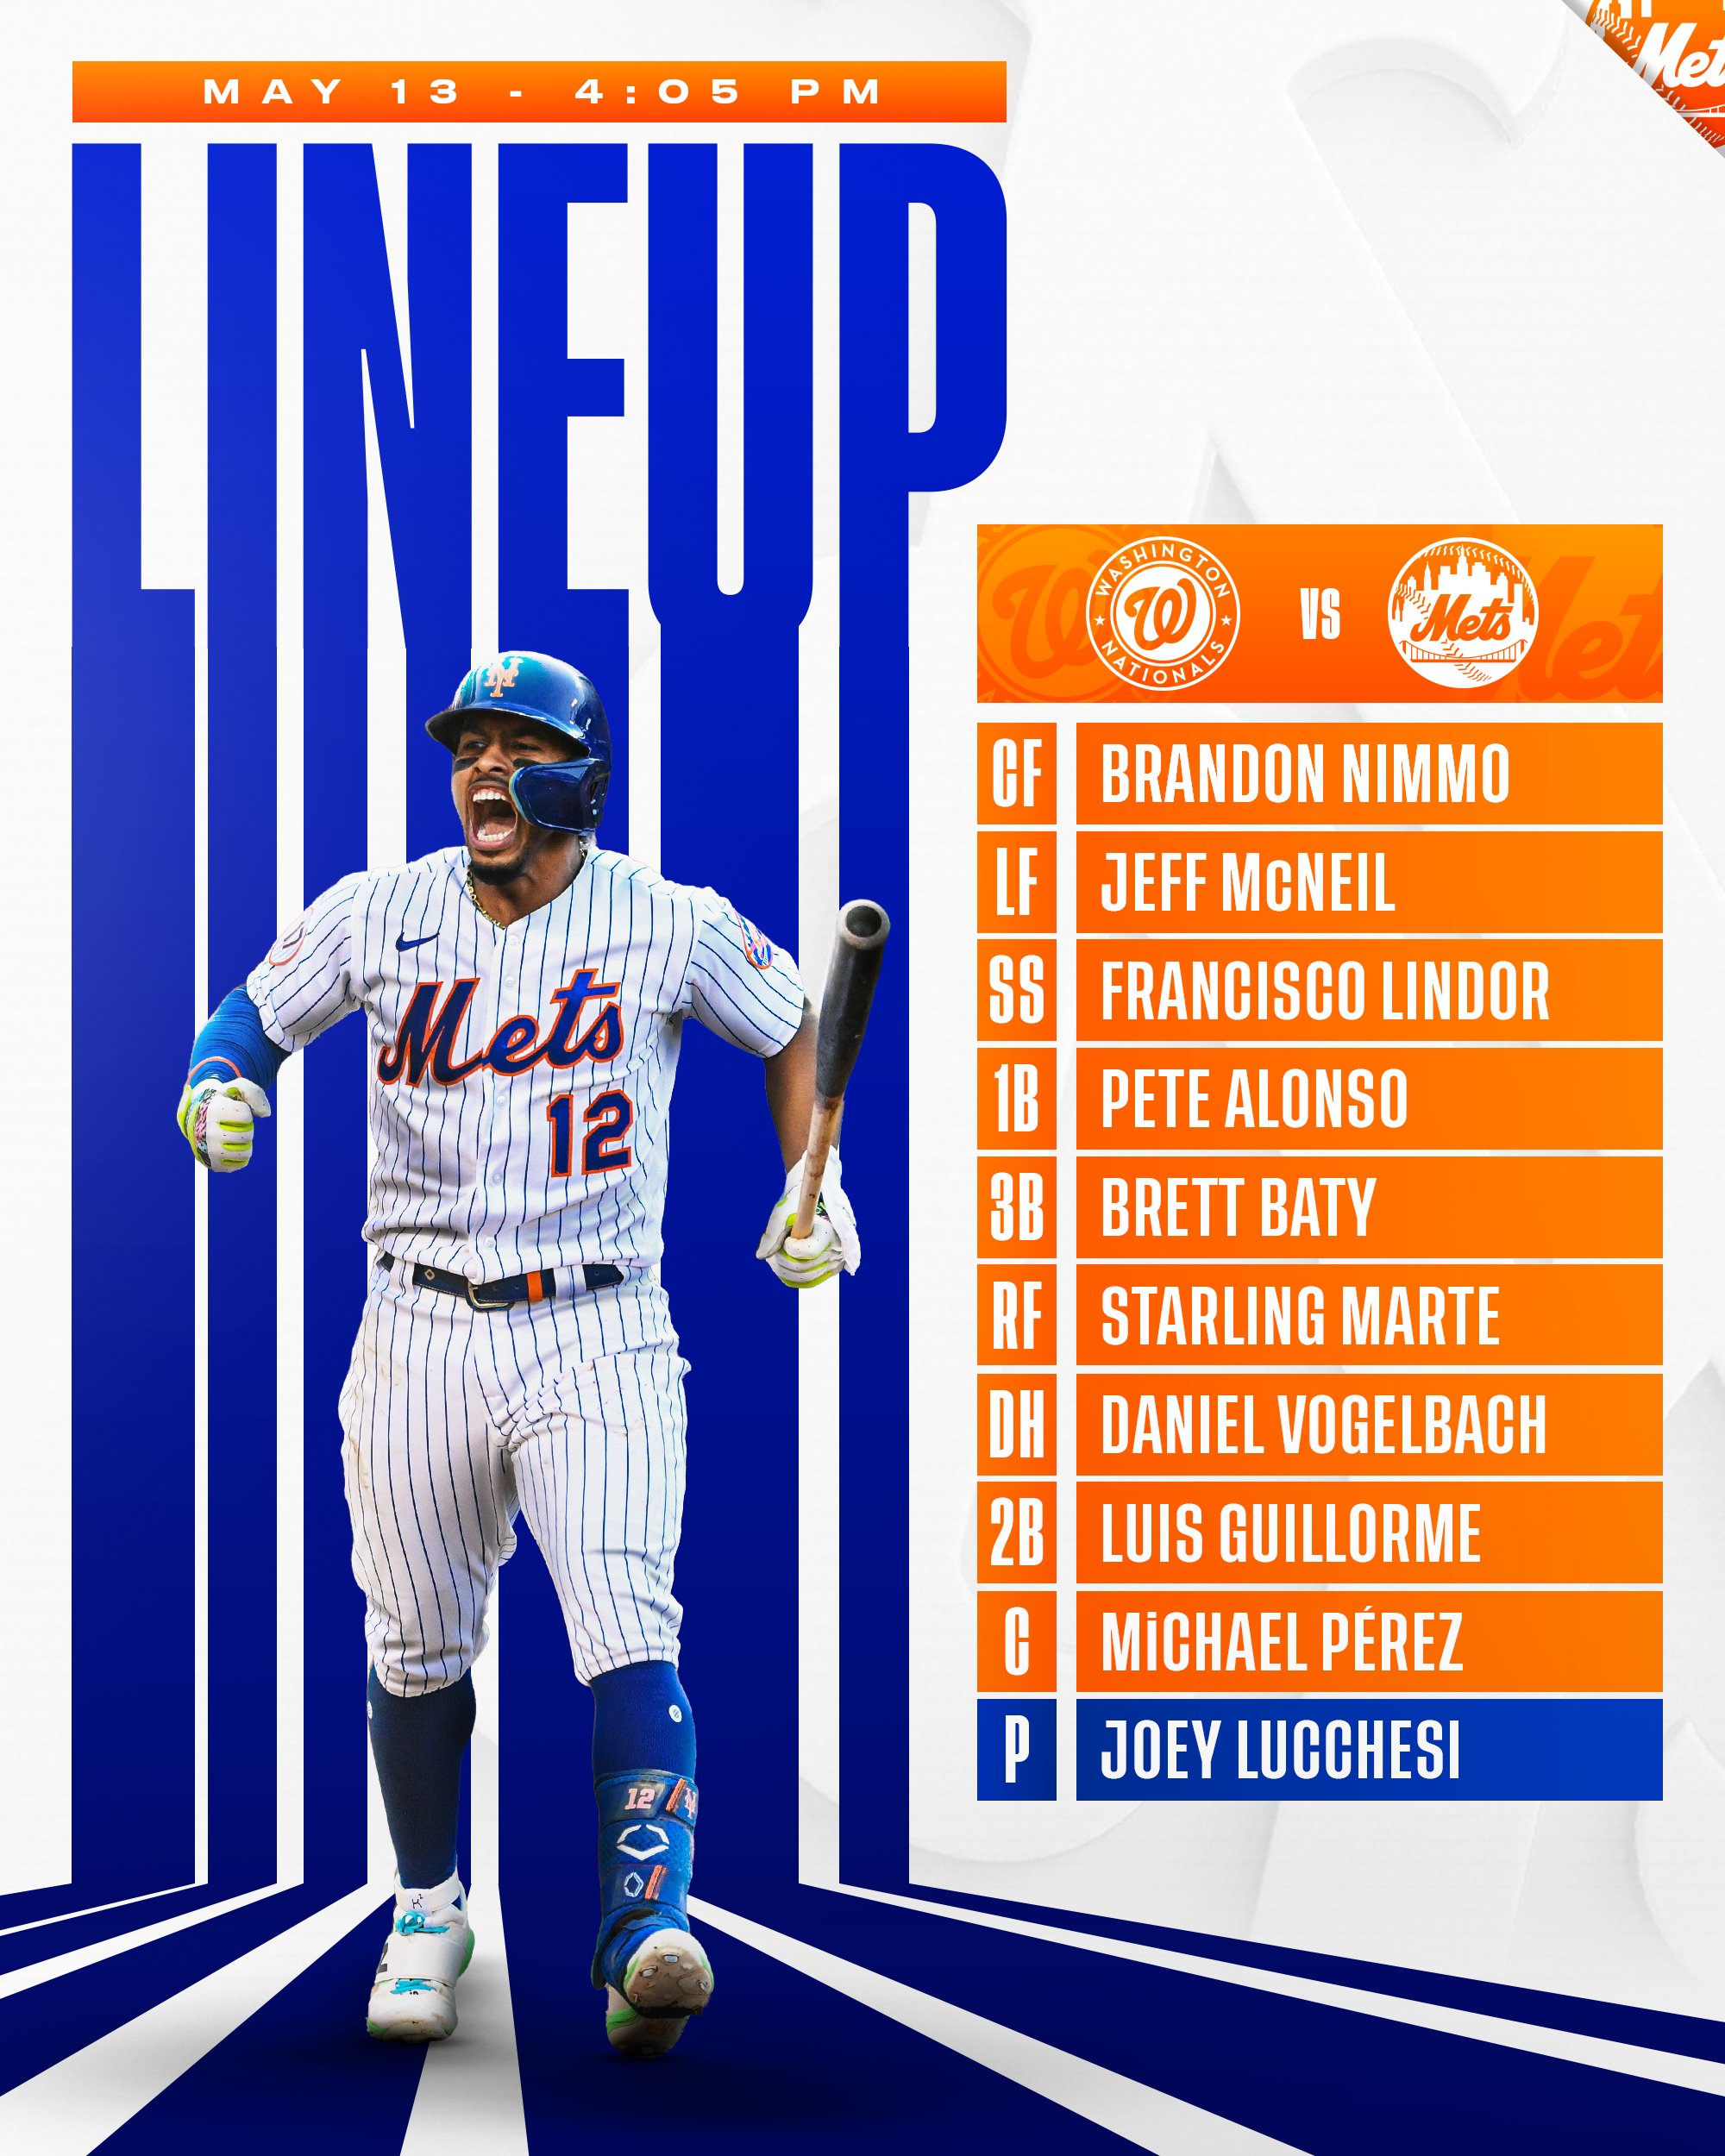 New York Mets on X: Saturday in the nation's capital. #LGM